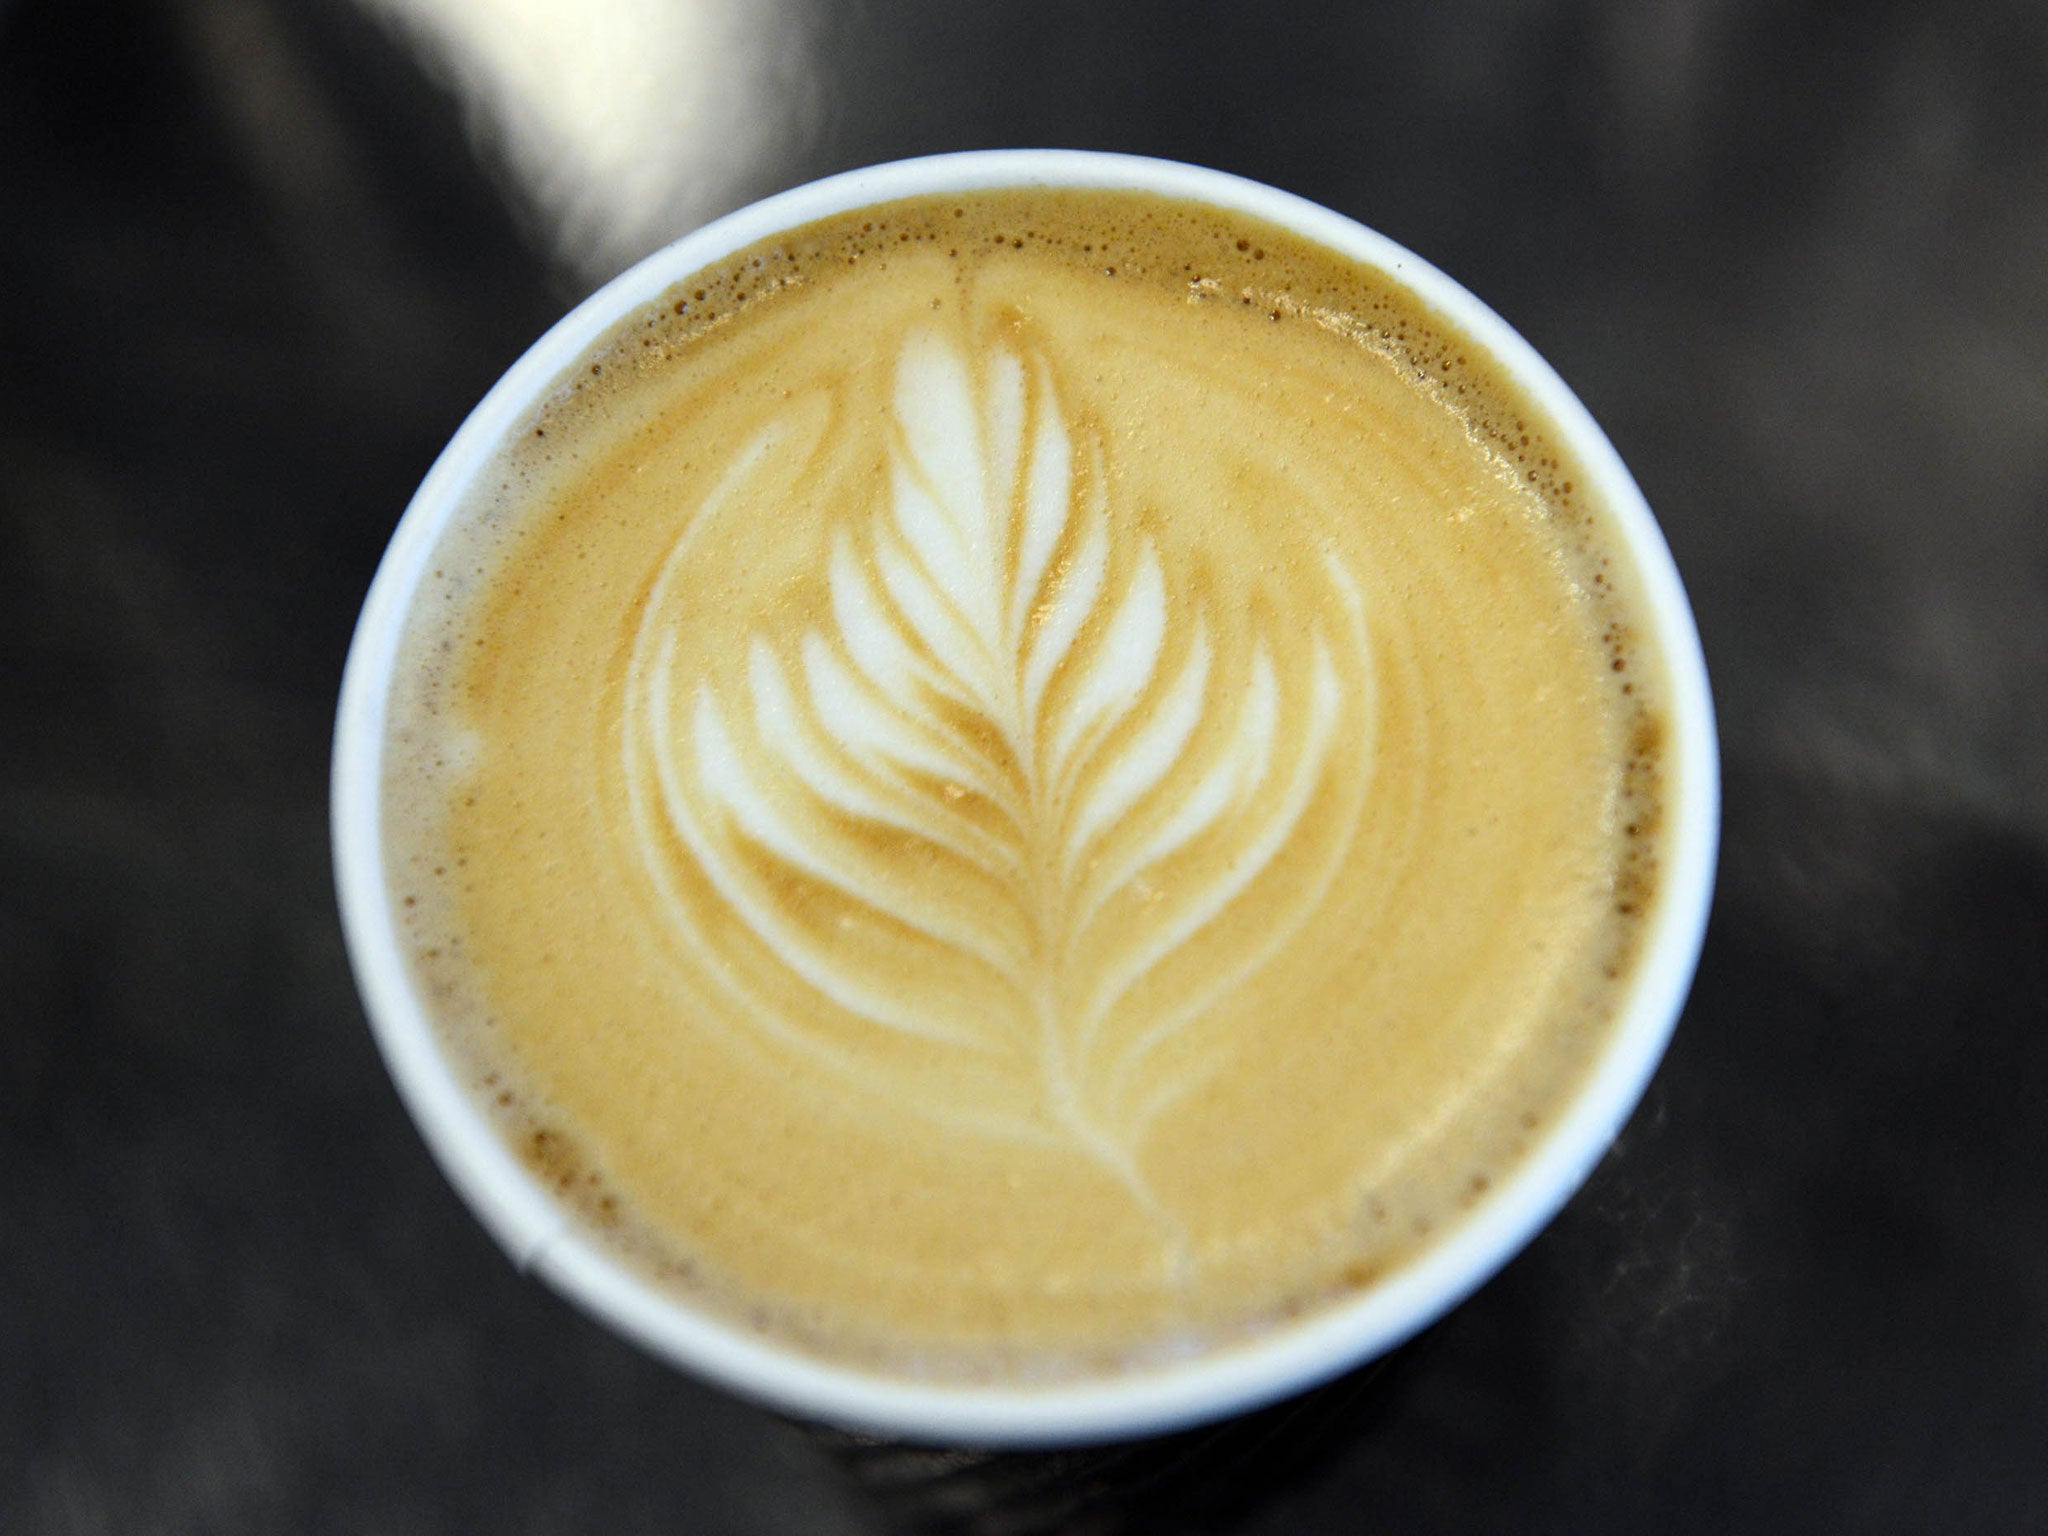 A Harvard study suggests coffee could halve risk of suicide